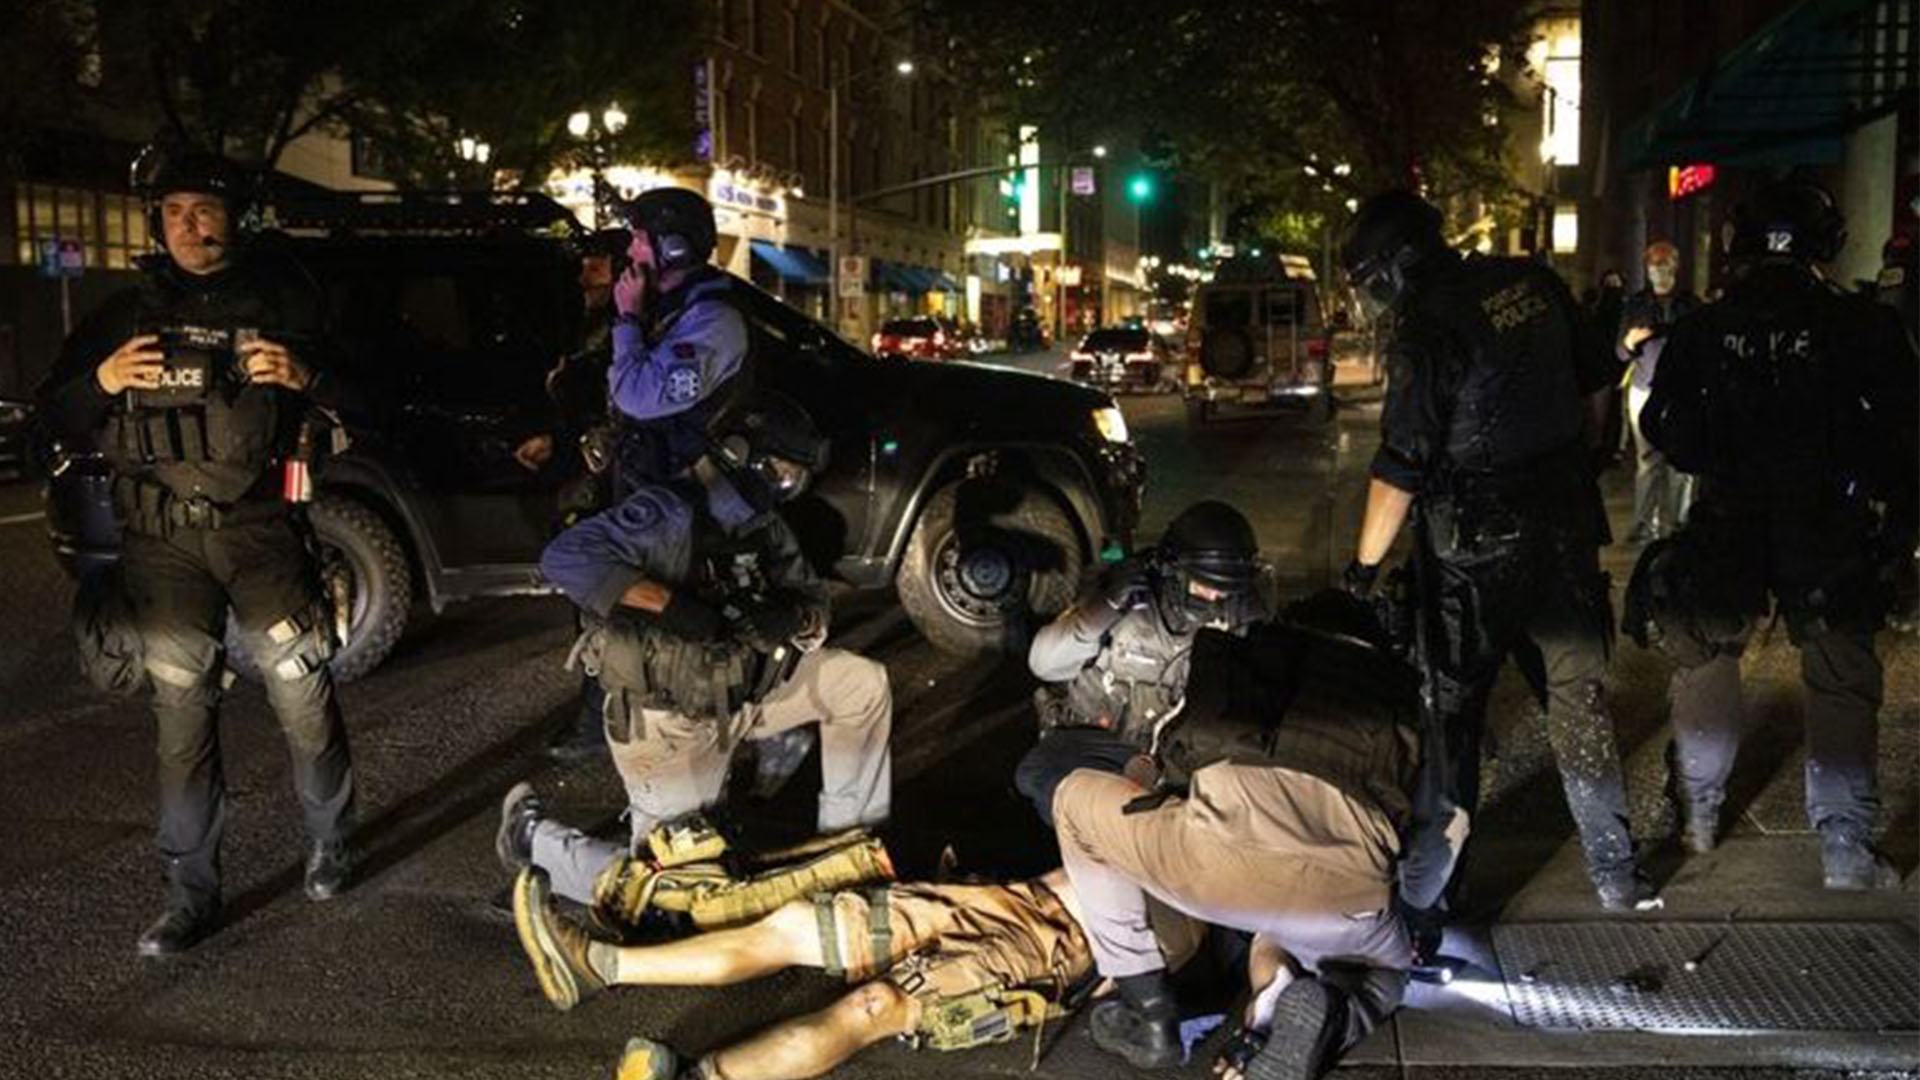 1 killed as Trump supporters, BLM protesters clash in Portland, Oregon